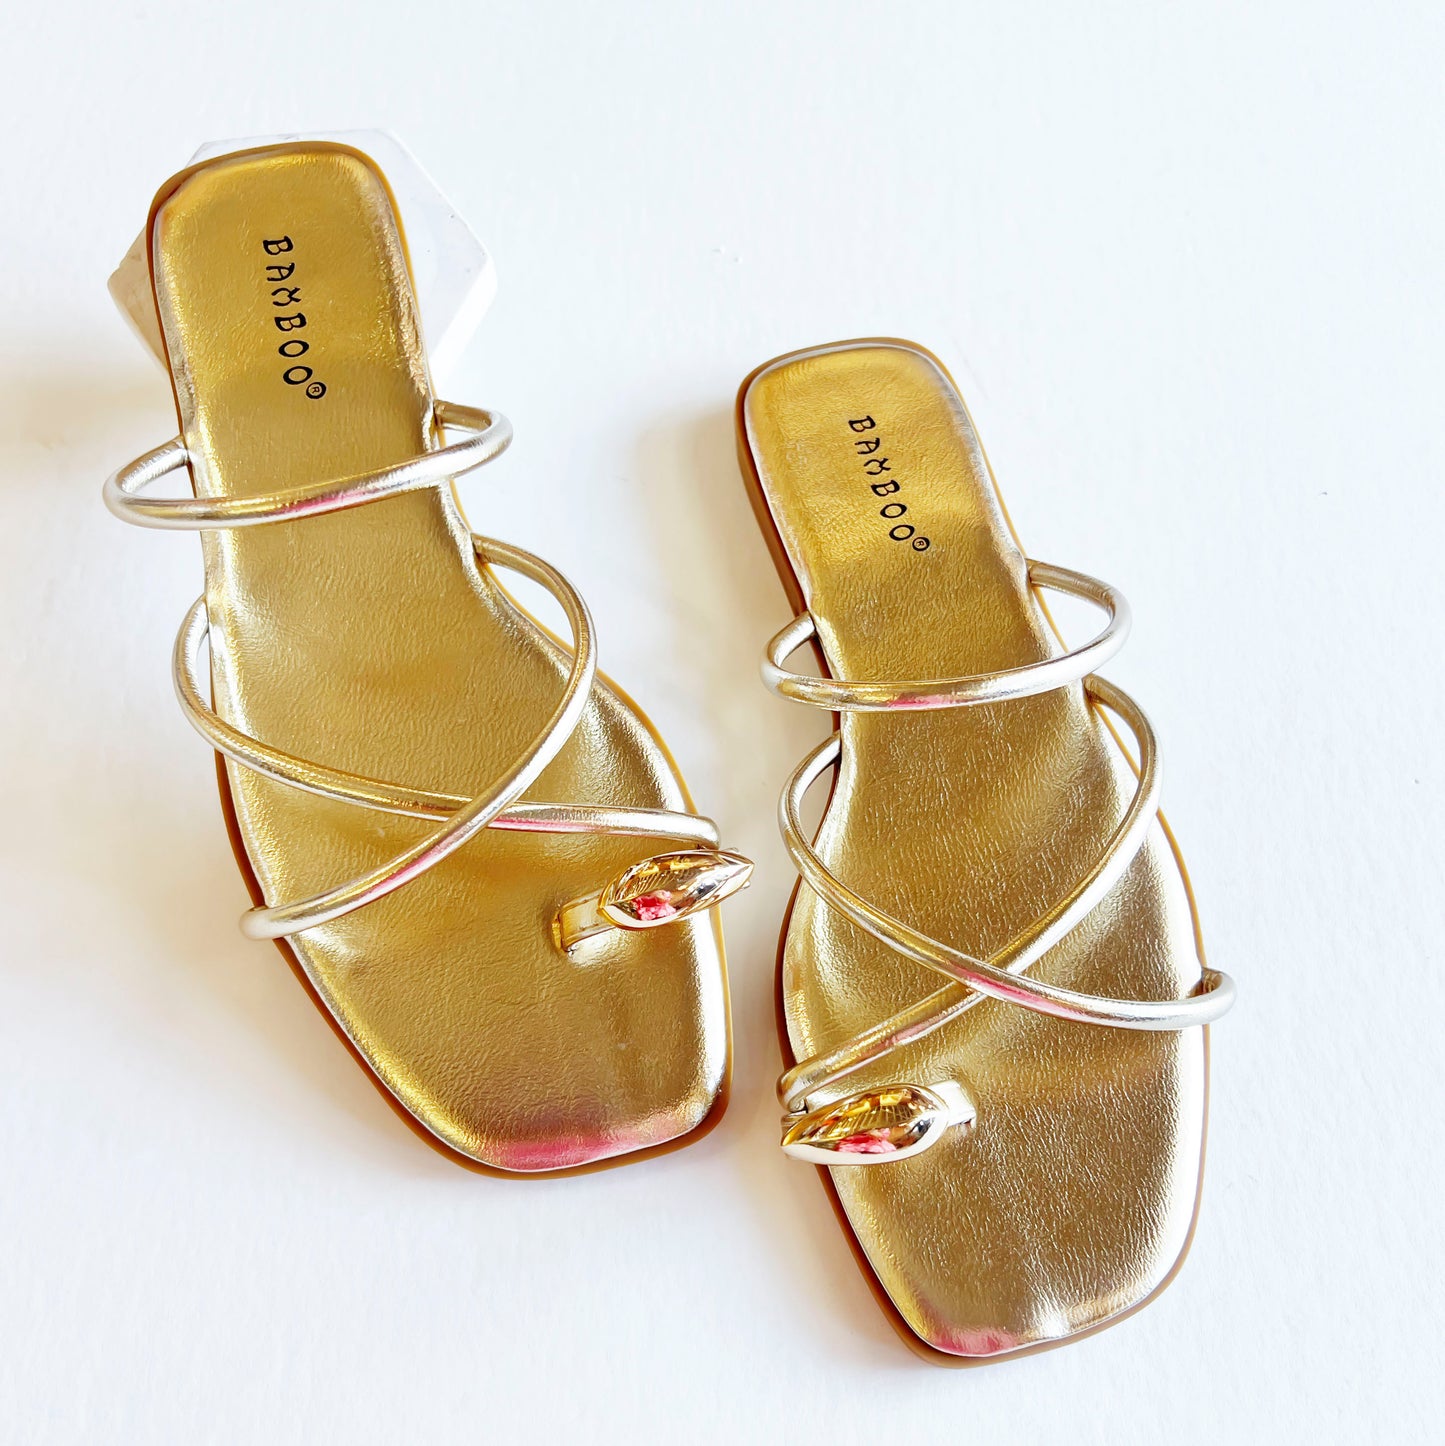 Pair of gold strappy toe ring sandals for women, showcasing metallic straps and a chic toe ring.